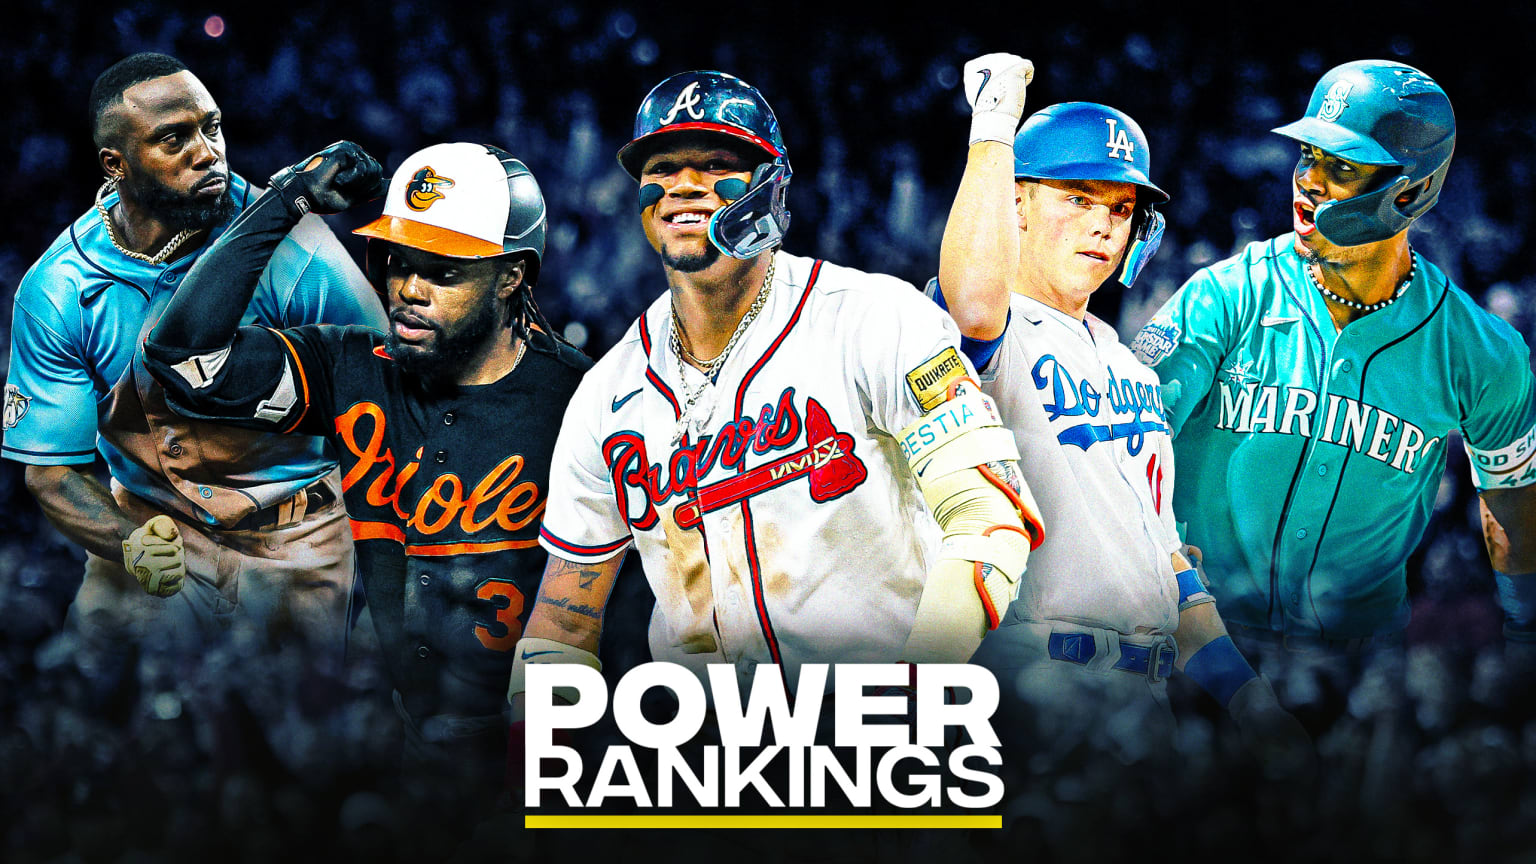 Randy Arozarena, Cedric Mullins, Ronald Acuña Jr., Will Smith and Julio Rodríguez are pictured above the Power Rankings logo